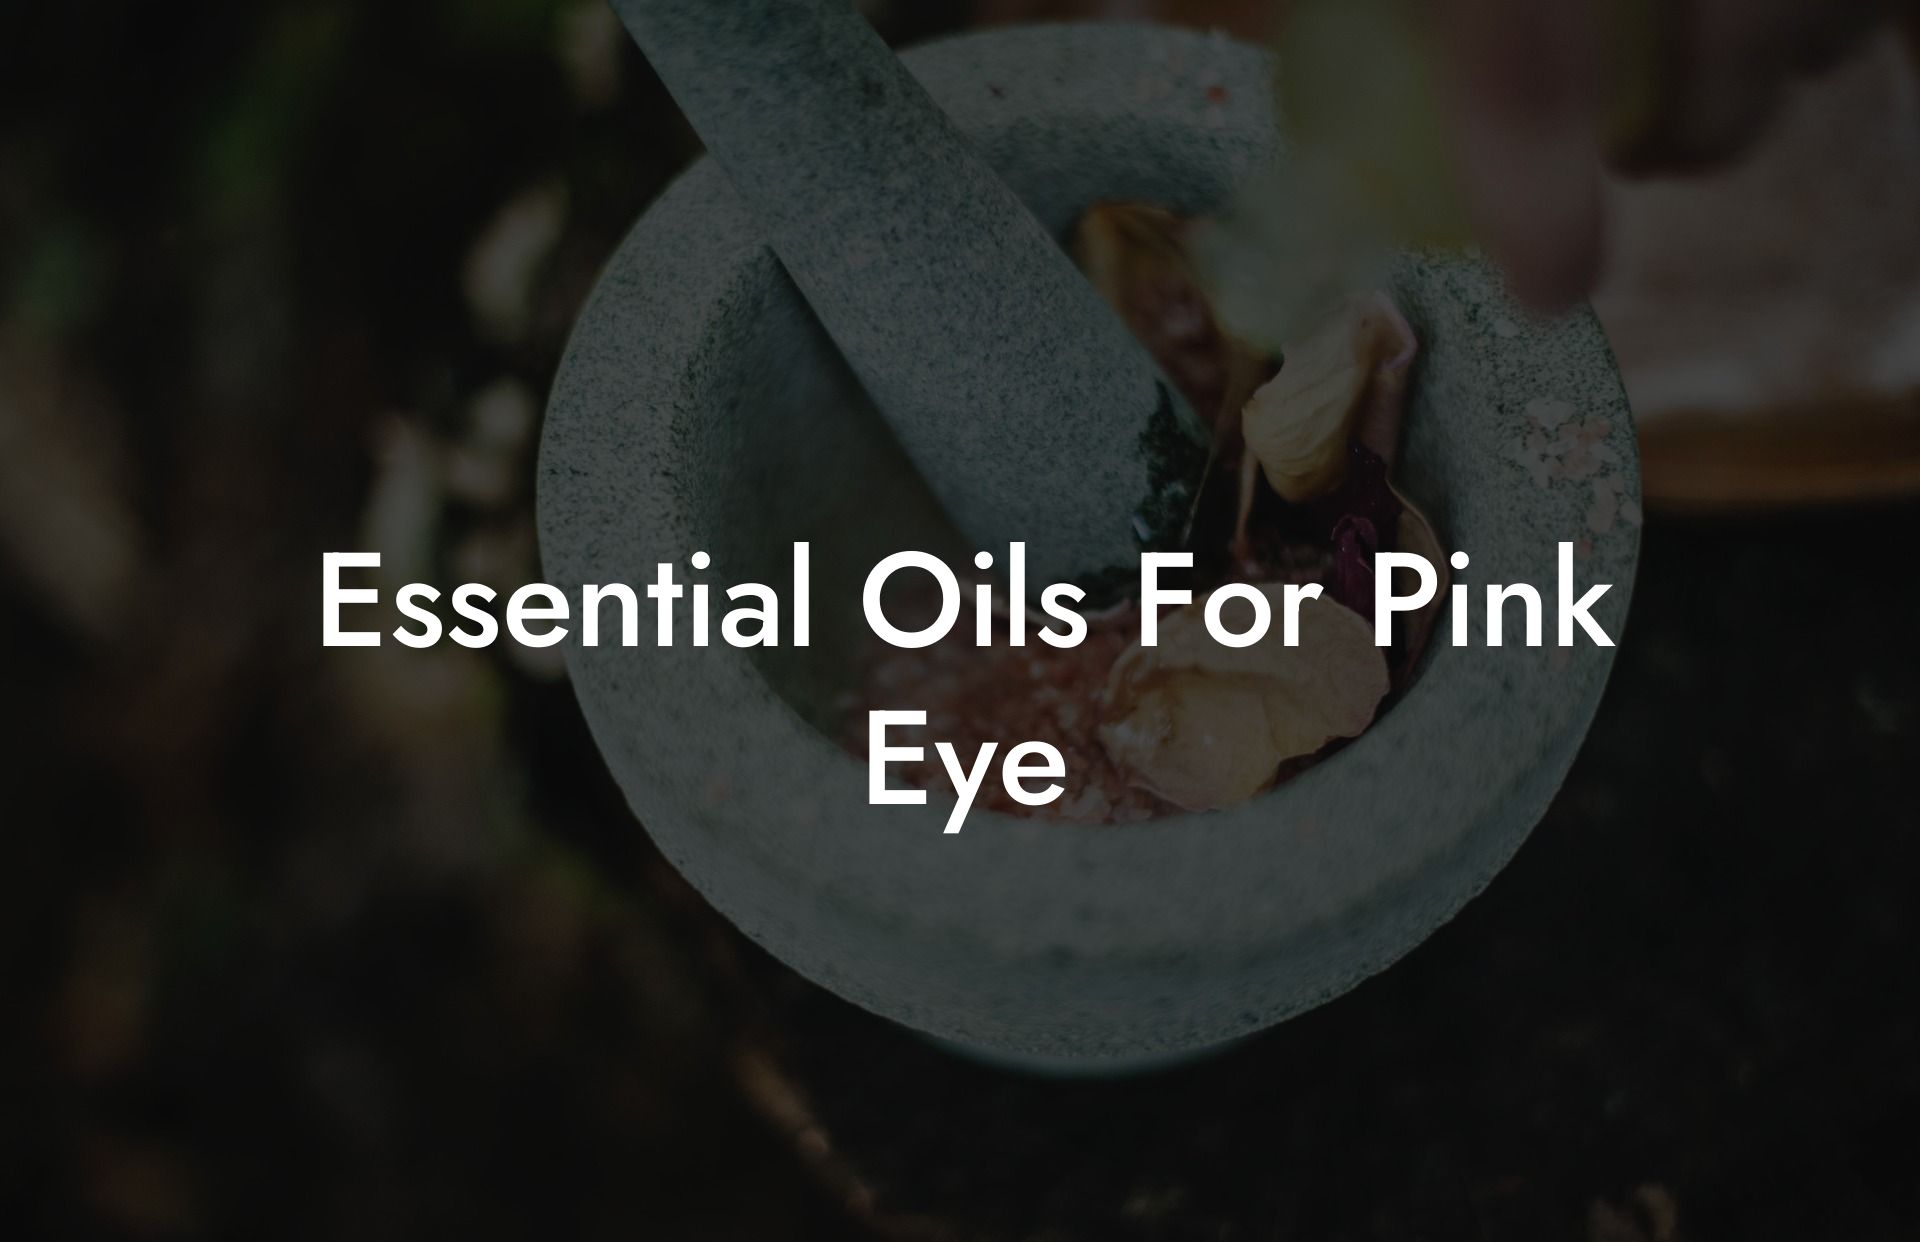 Essential Oils For Pink Eye